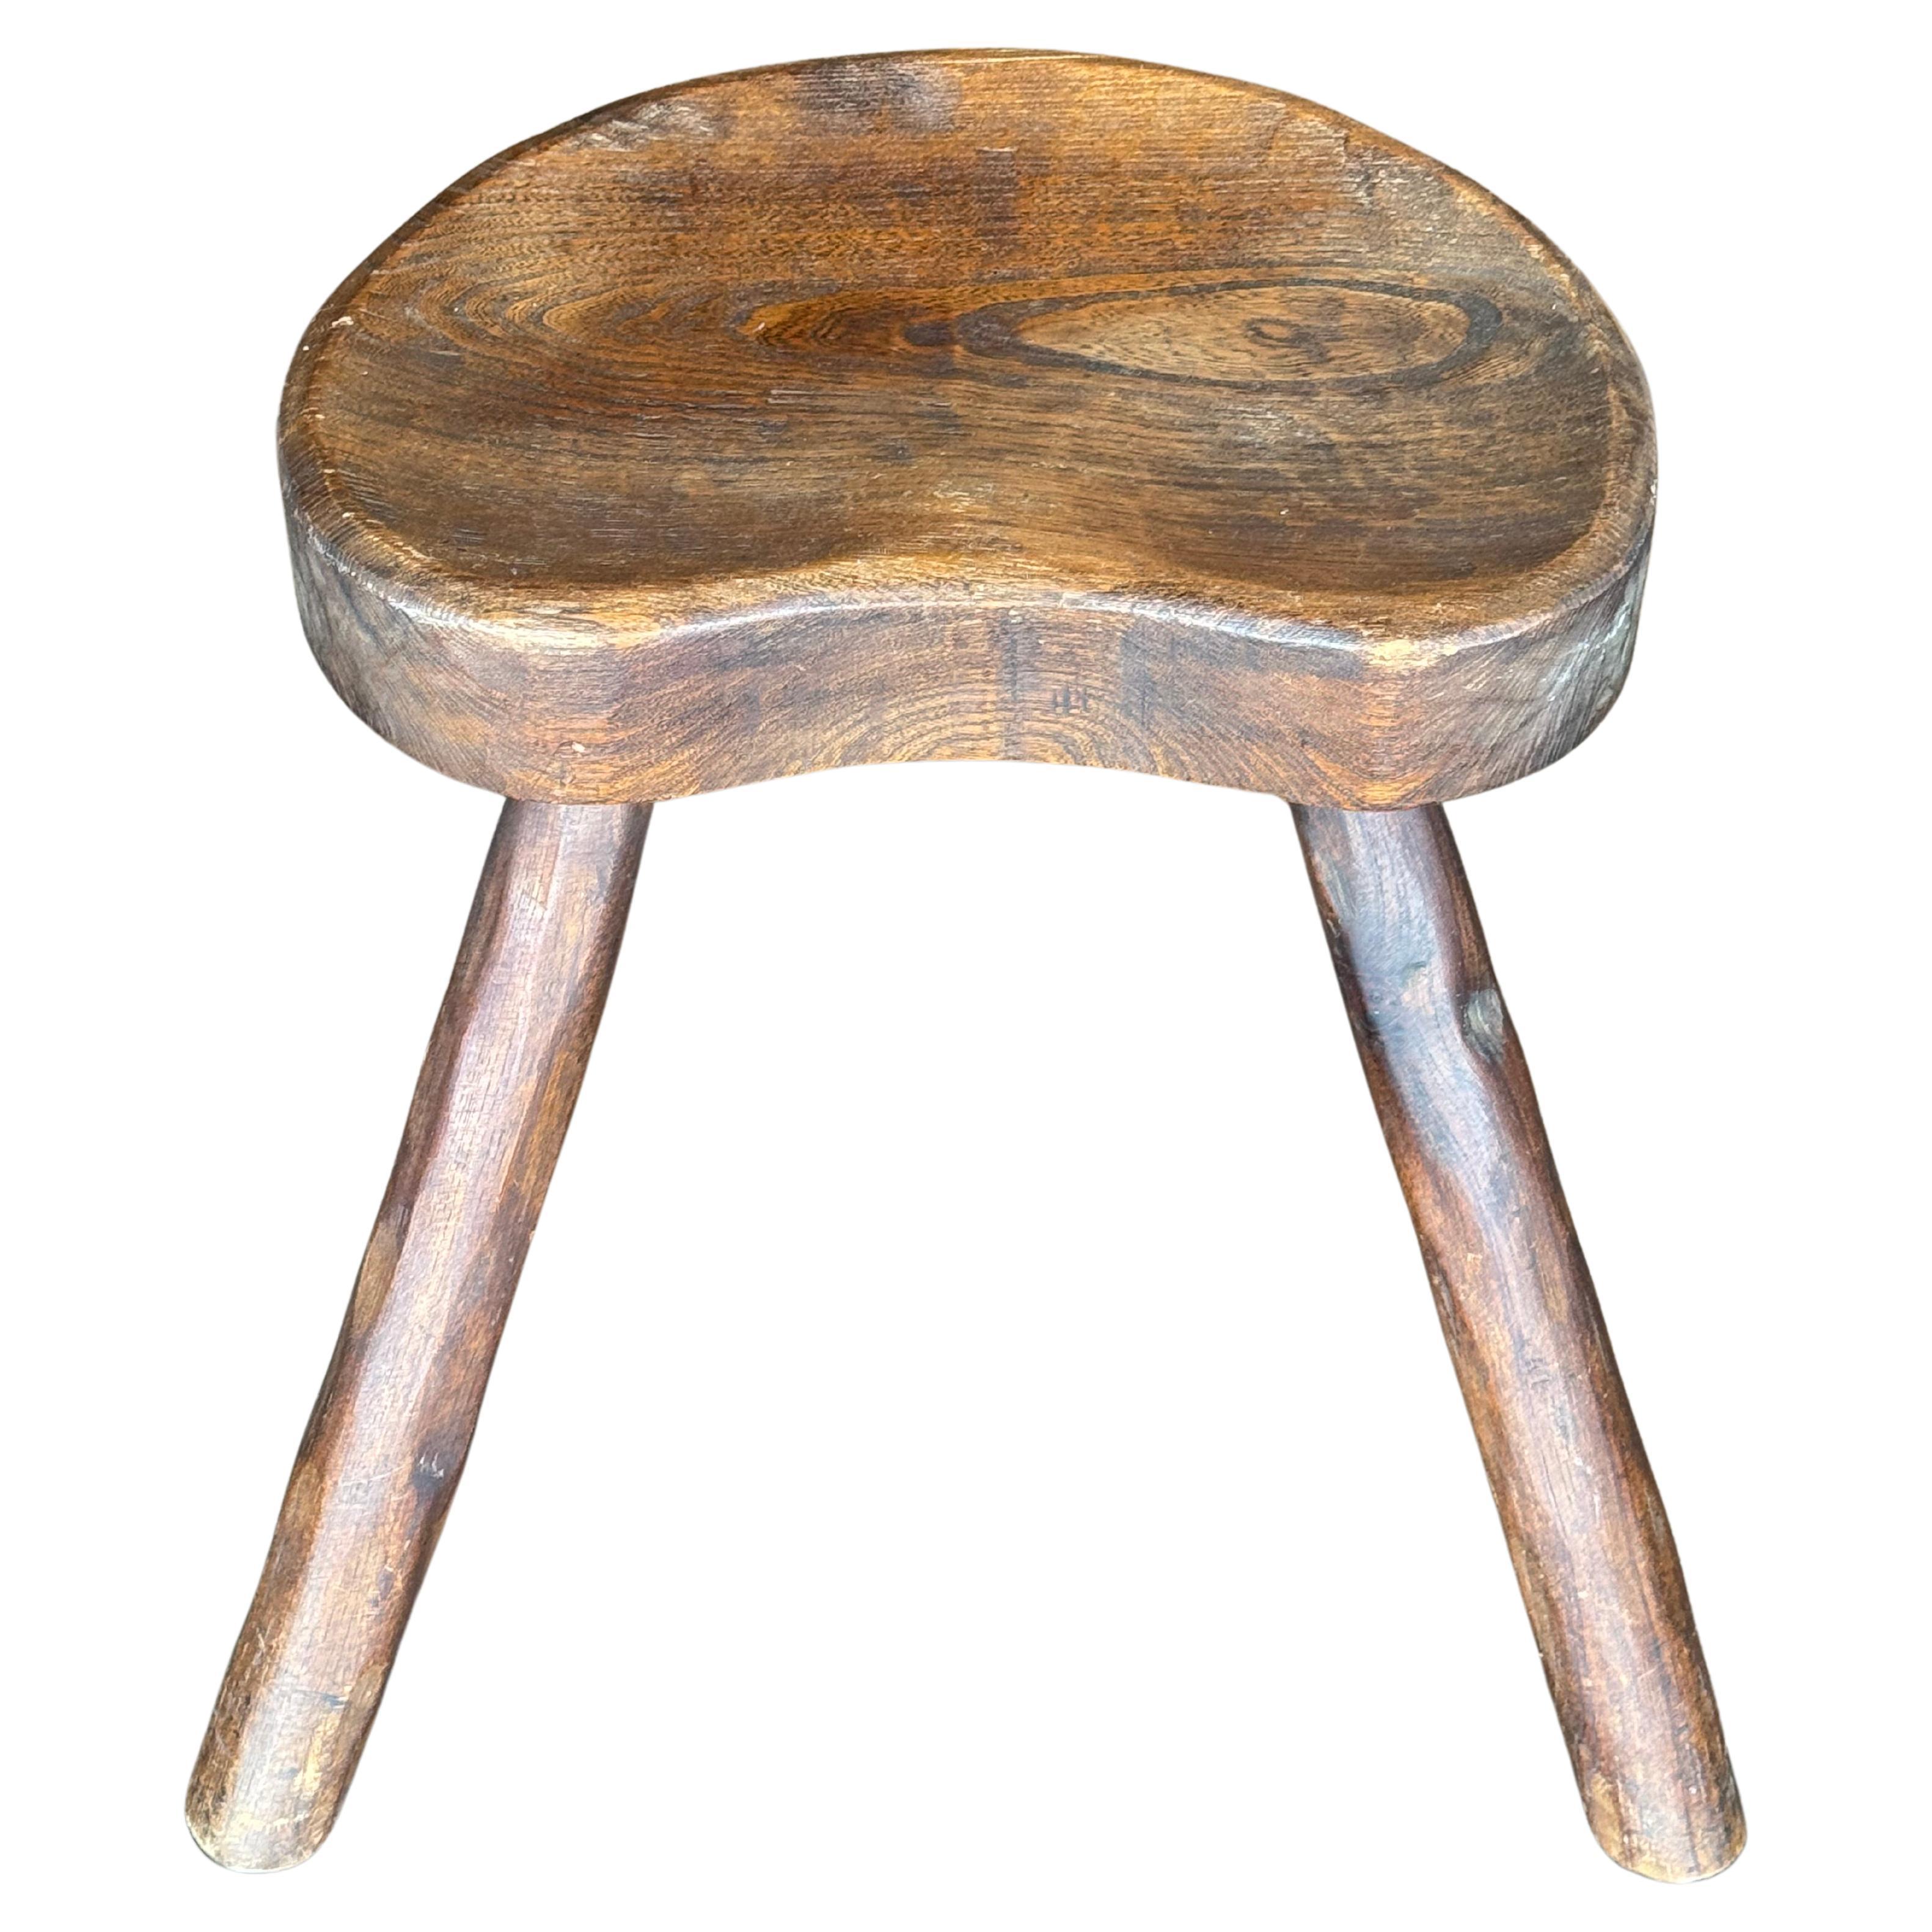 Tripod Danish Stools, sold as a pair
Suitable as ottomans, occasional stools, or side tables
Hand-carved in a soft wood, with a natural patina that has contributed to its antique allure overtime
Vintage find by Martyn Lawrence Bullard
